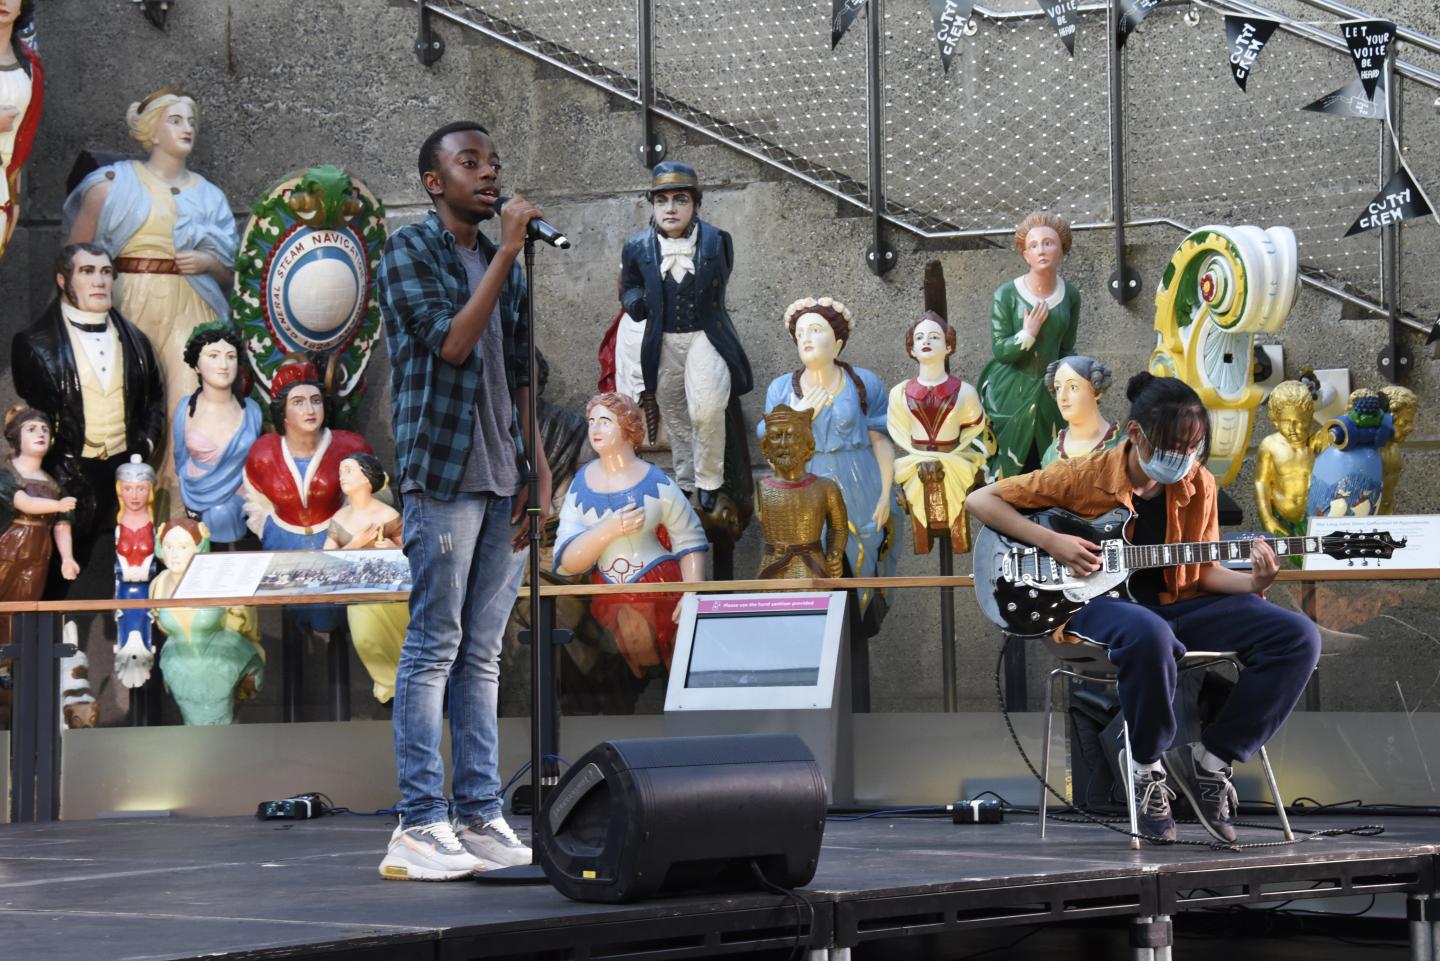 Two young performers on stage at Cutty Sark in front of the figure heads